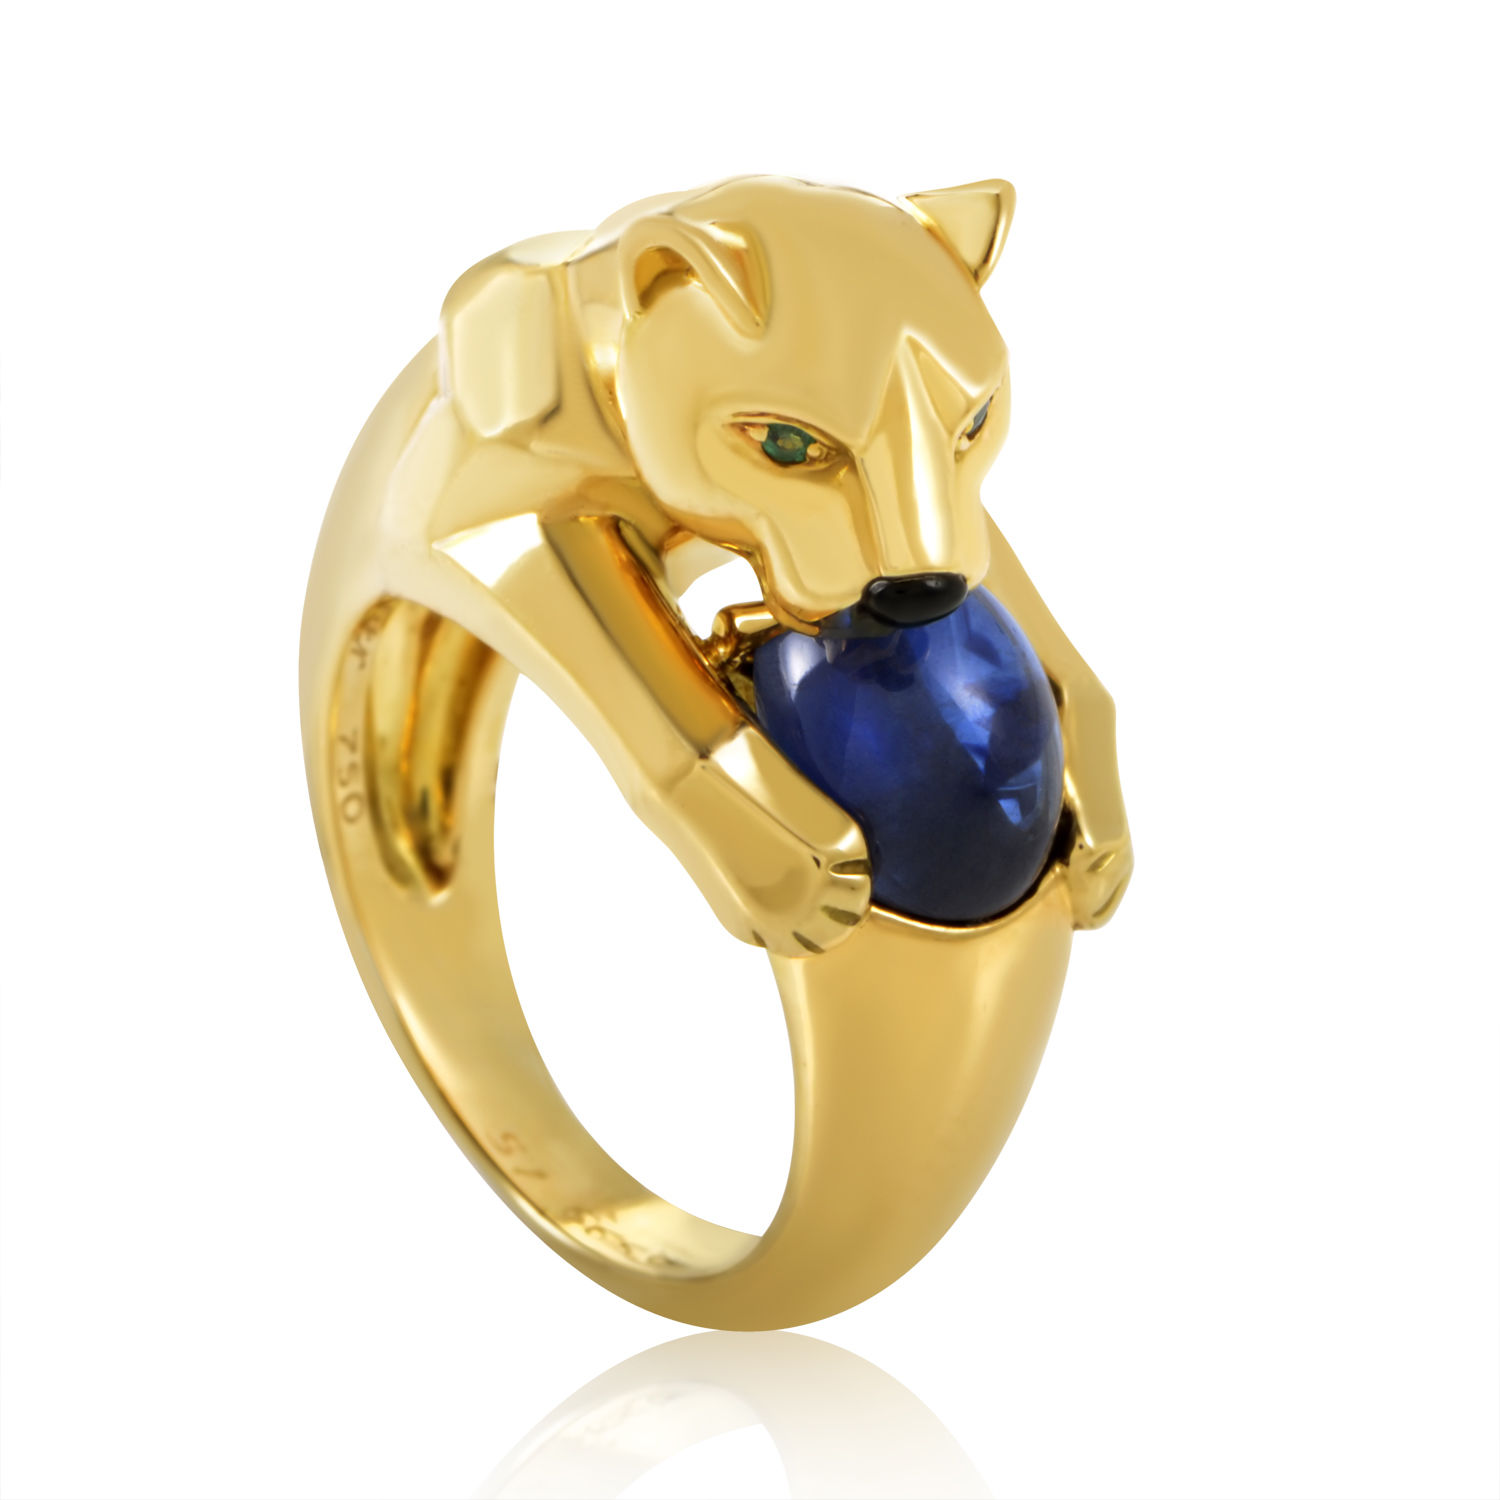 A Cartier Panthere 18K Yellow Gold Sapphire Ring Eyes Desire